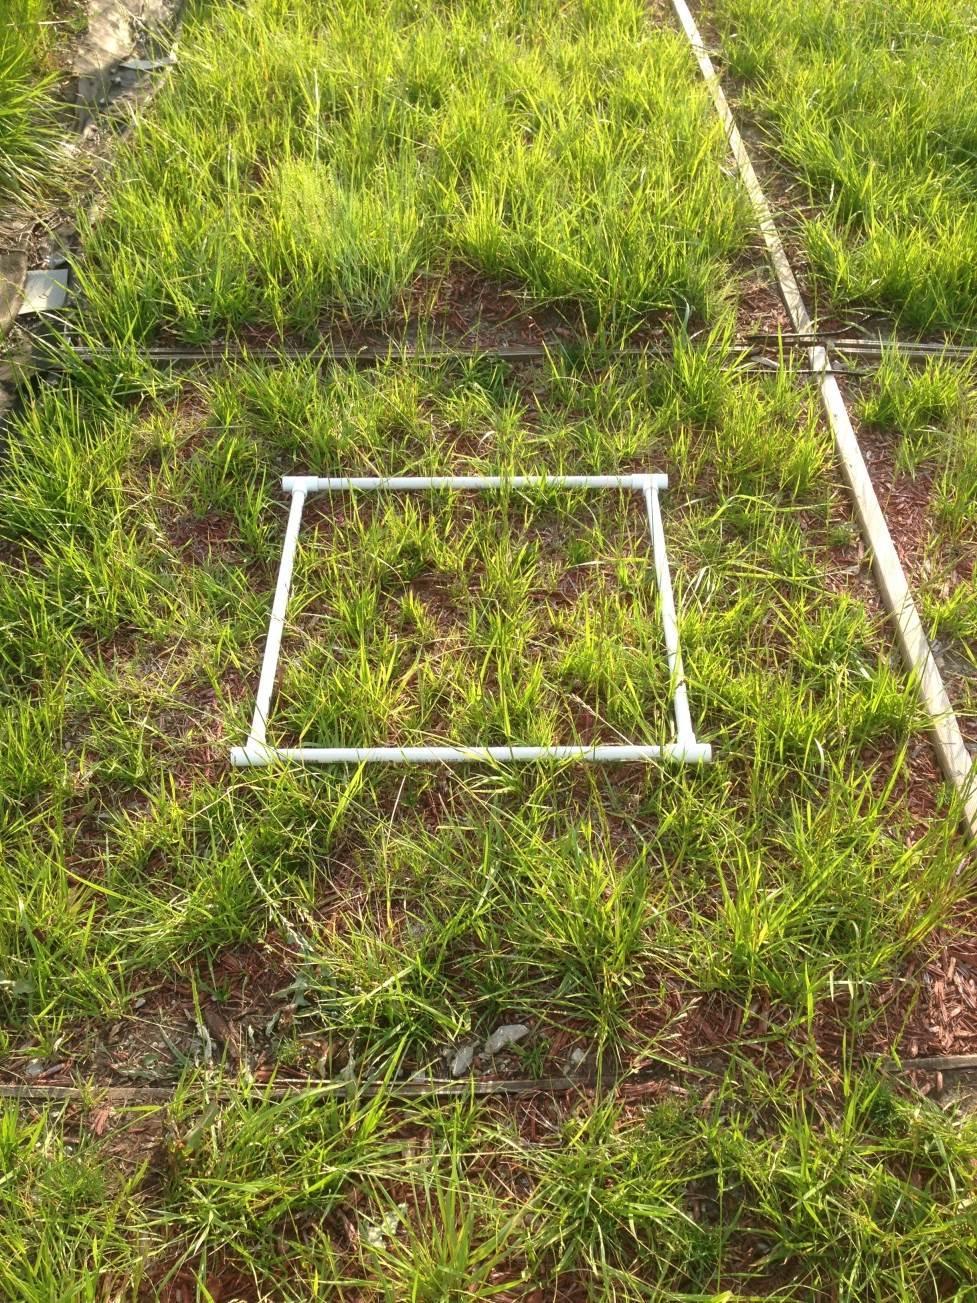 GRASS DENSITY Number of sprouts in a 0.6 m by 0.